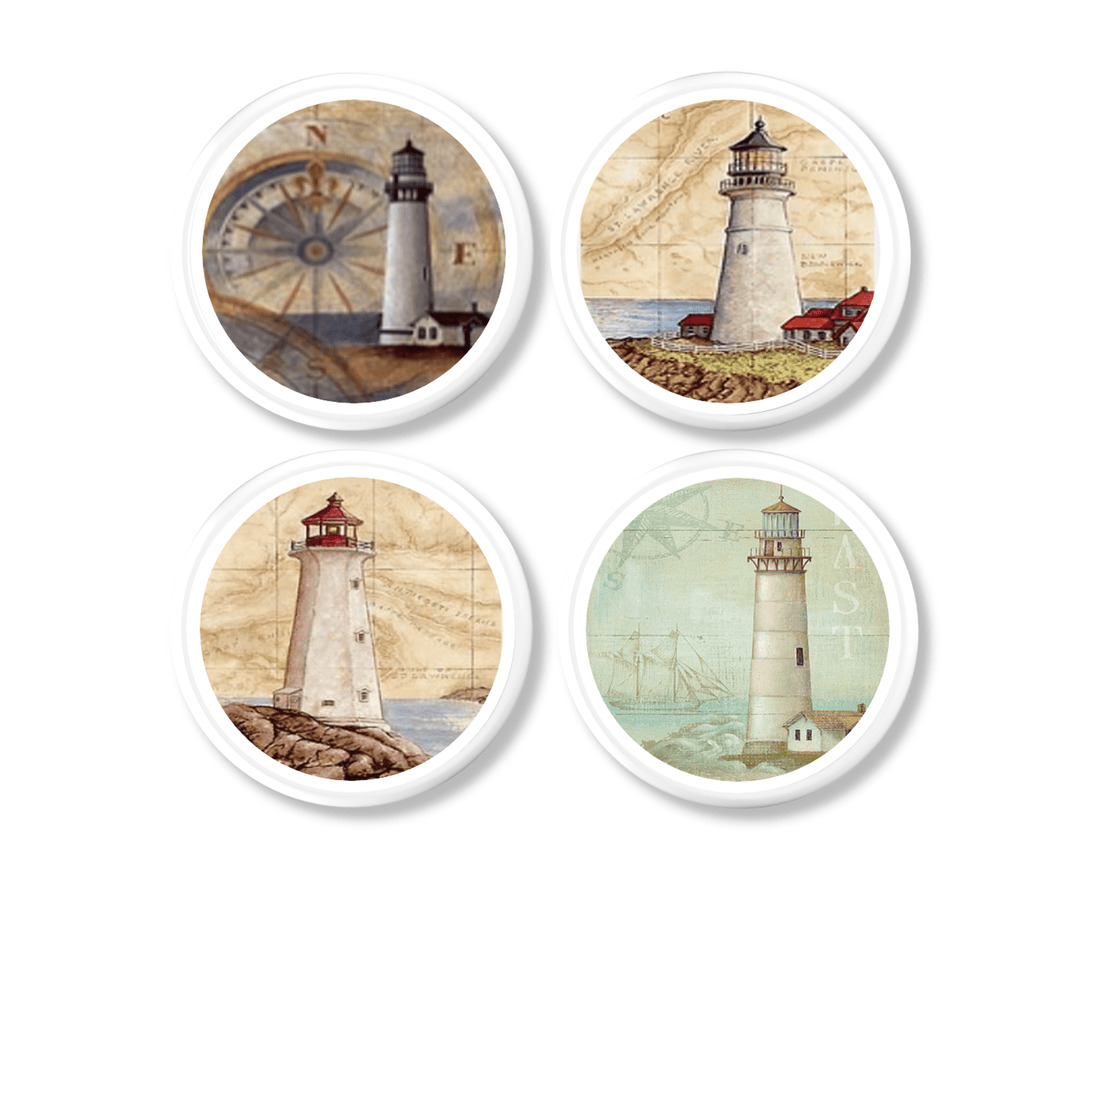 set of 4 lighthouse theme furniture drawer knobs. Vintage nautical map and seashore scene for bathroom cabinet pulls.